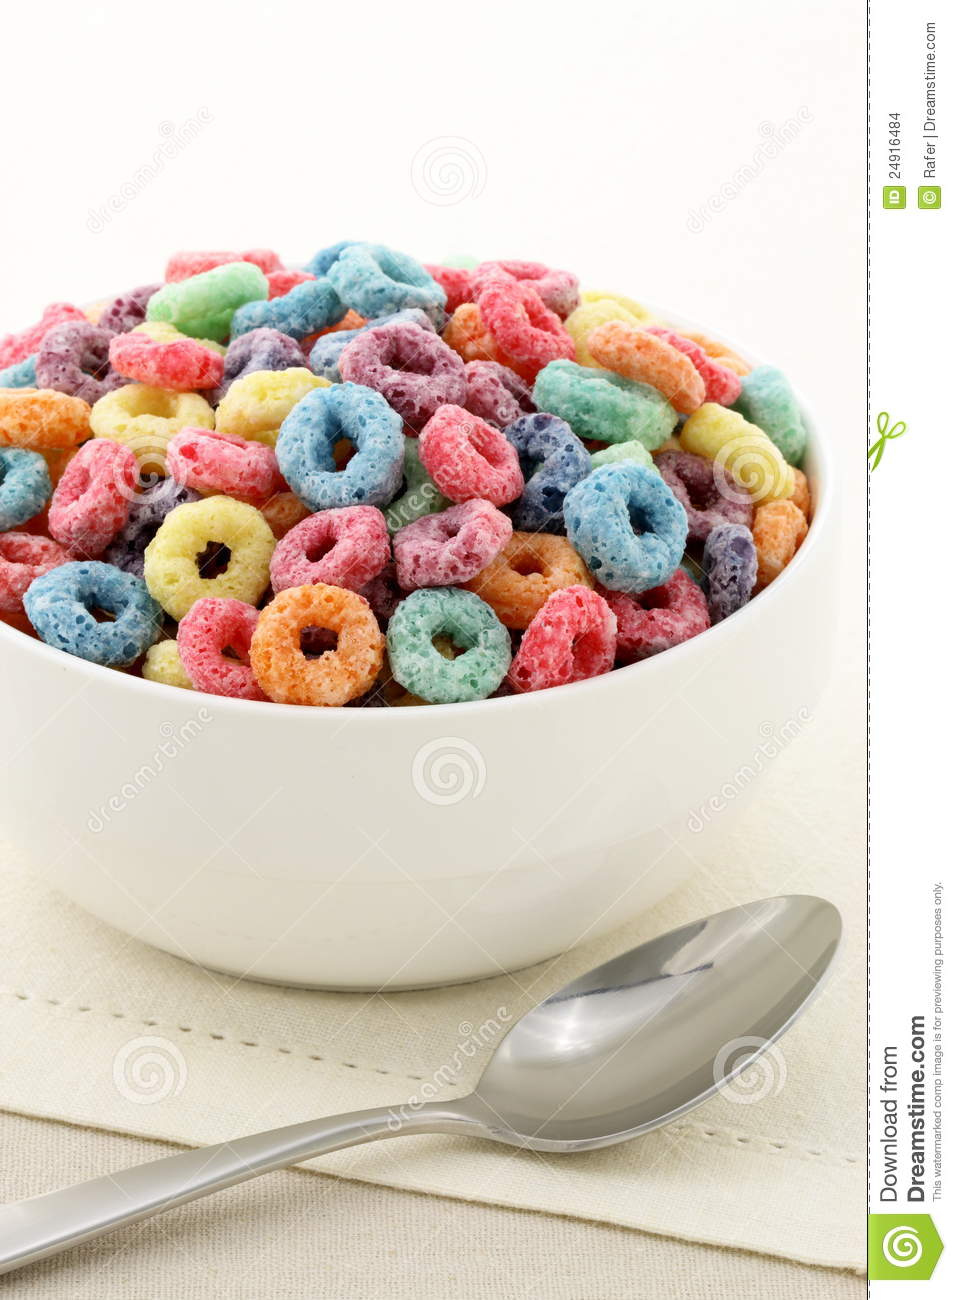 Kids Delicious Cereal Loops Or Fruit Cereal Stock Images   Image    